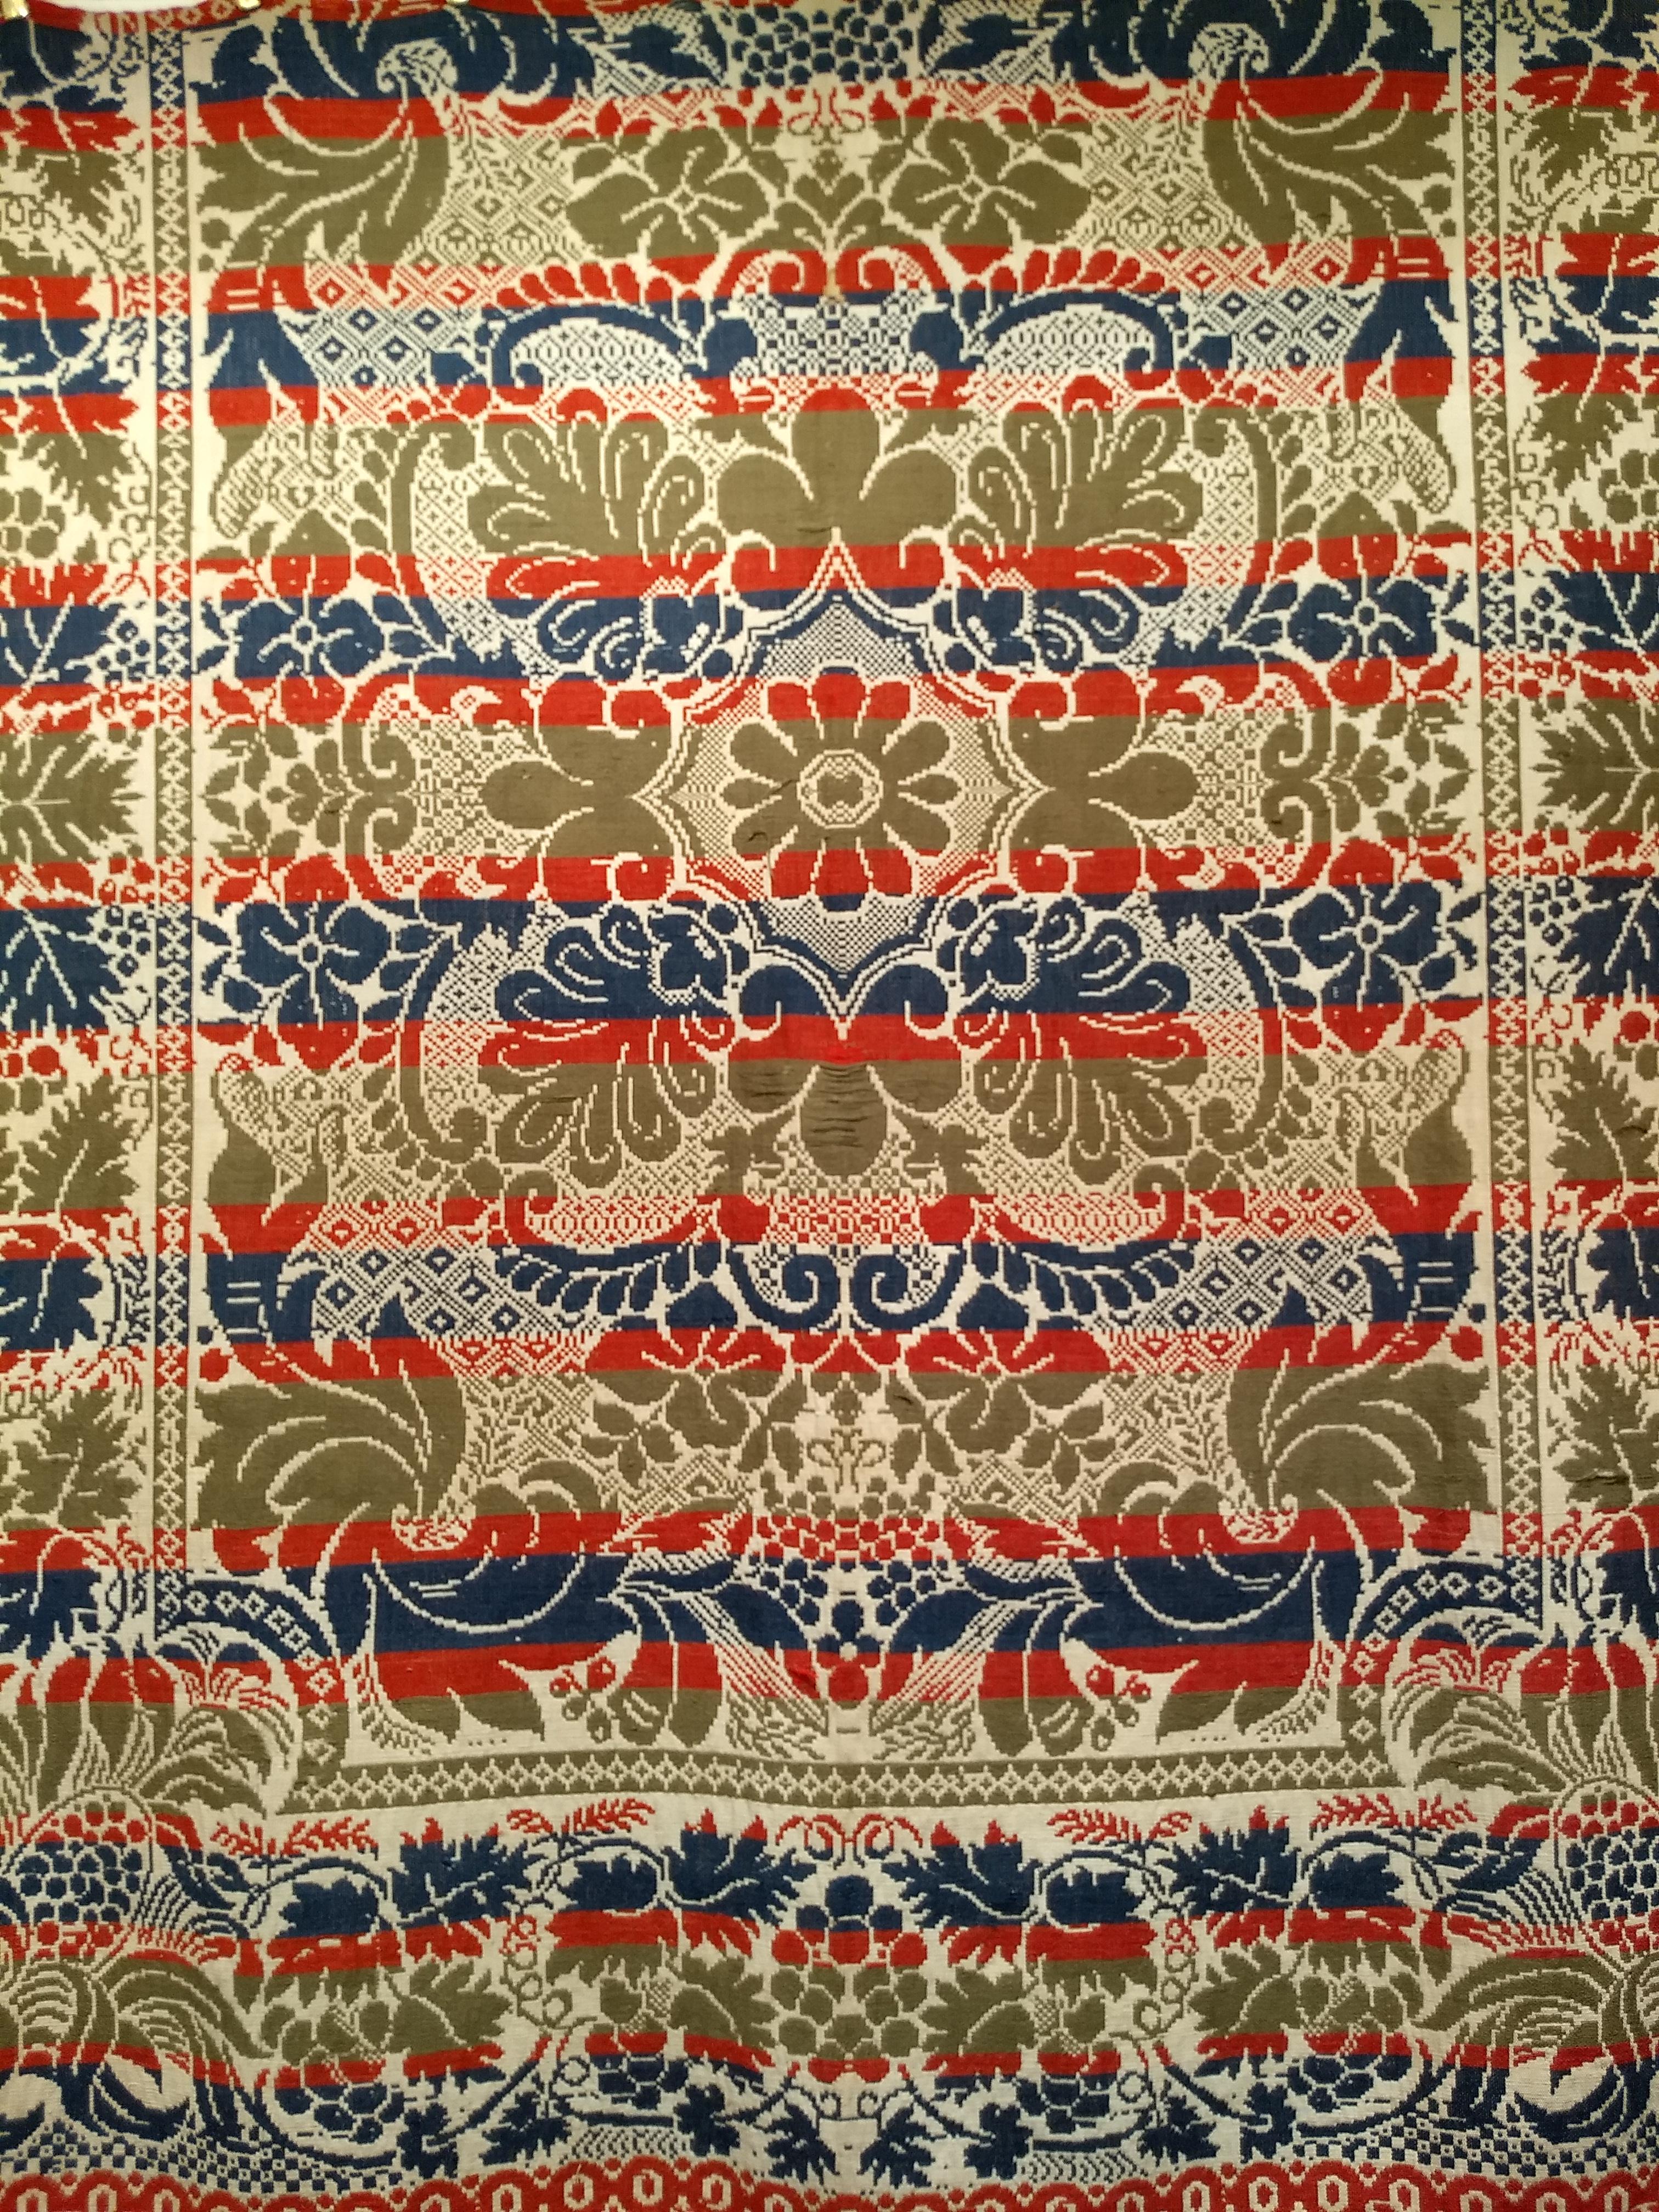 A beautiful Pennsylvania American Coverlet from the mid 1800s.  The American Coverlet has large format floral design in red, blue and green set on an ivory color background.  The American coverlets became very popular during the early to mid part of